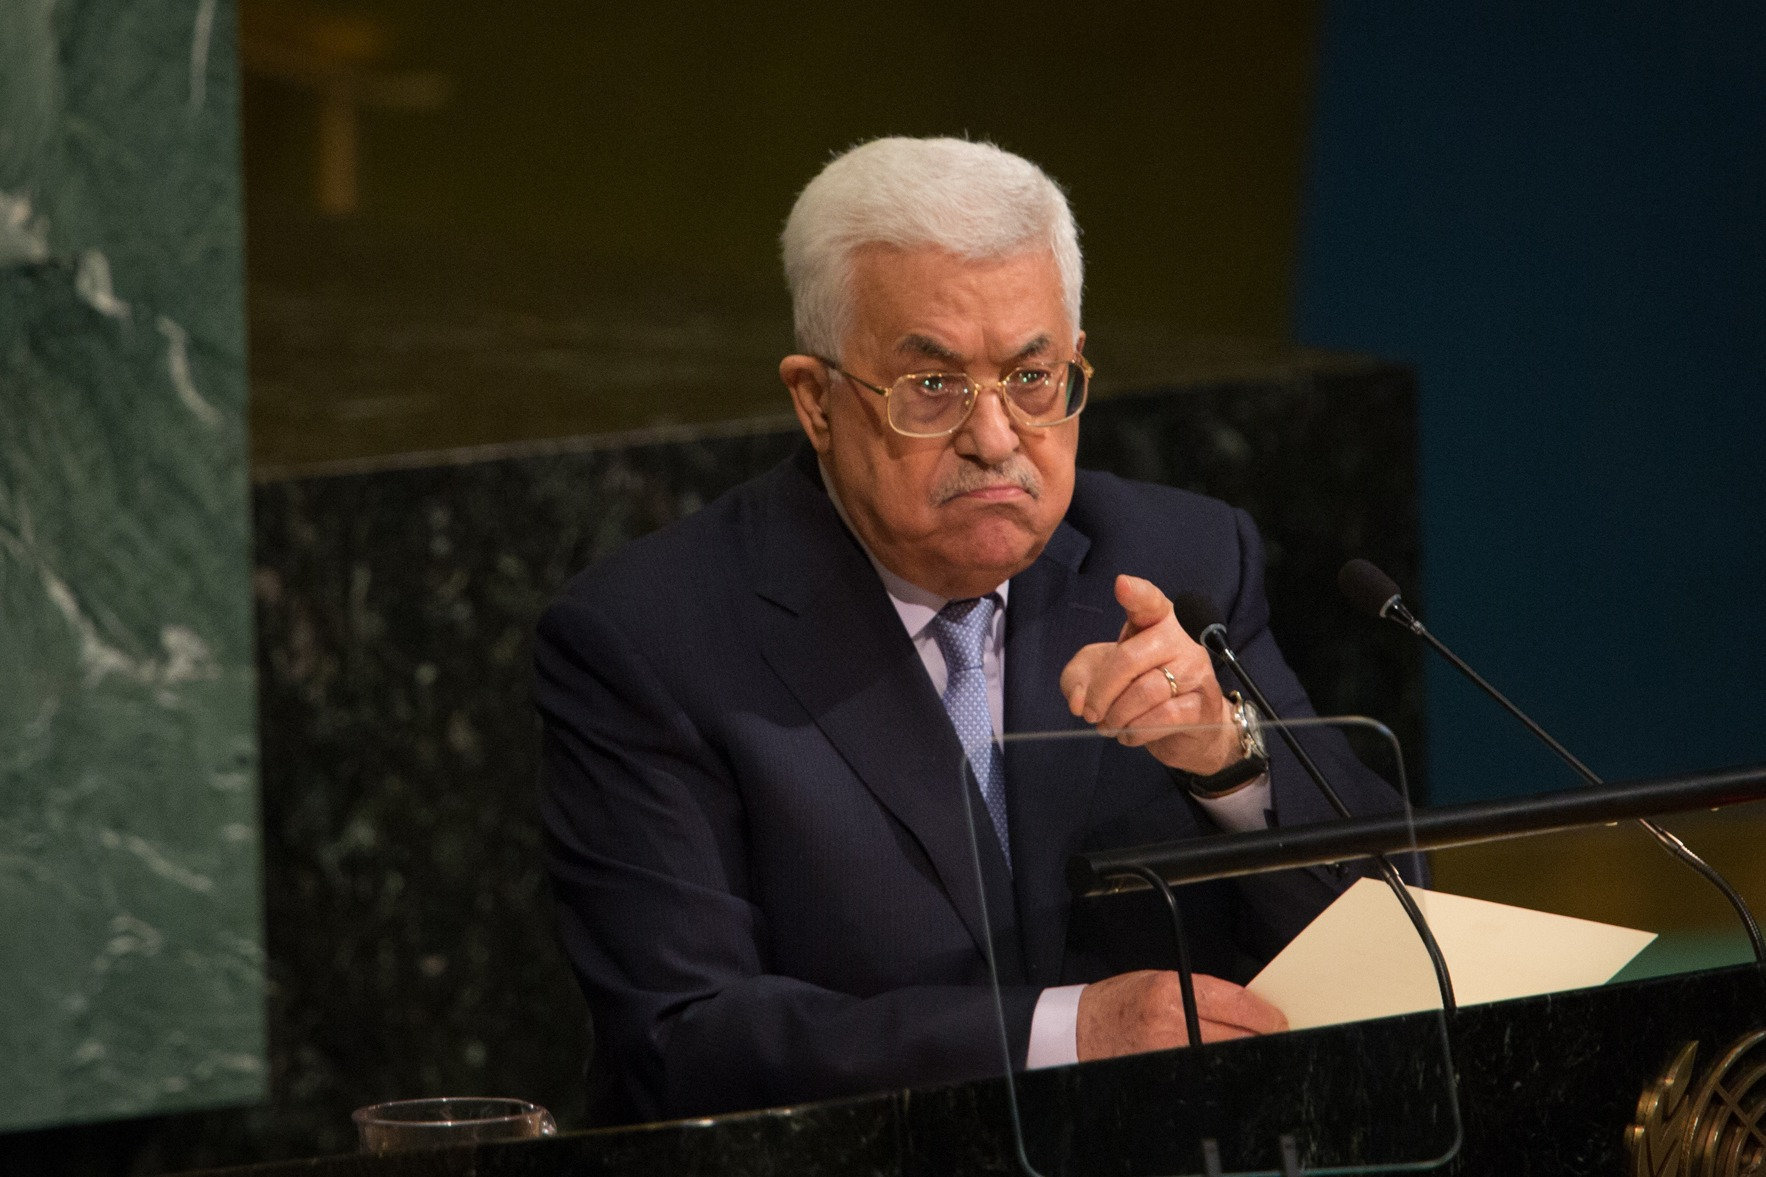 NEW YORK, NY - SEPTEMBER 20, 2017: The State of Palestines President Mahmoud Abbas speaks during the U.N. General Assembly at the United Nations on September 20, 2017 in New York, New York. (Photo by Kevin Hagen/Getty Images).